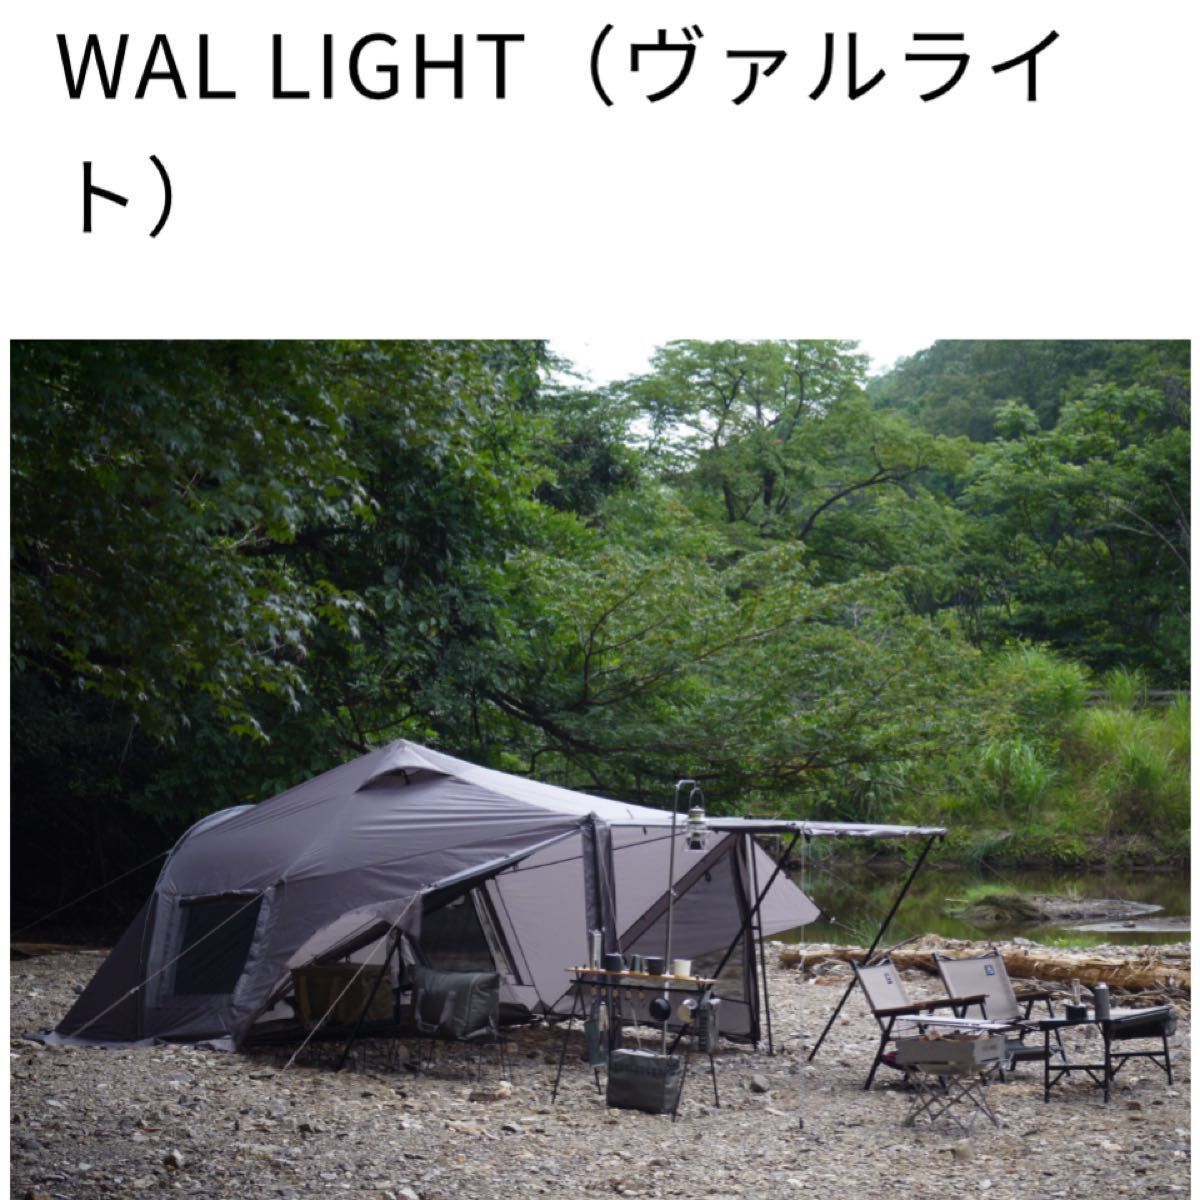 RatelWorks WAL LIGHT（ヴァルライト） | nate-hospital.com